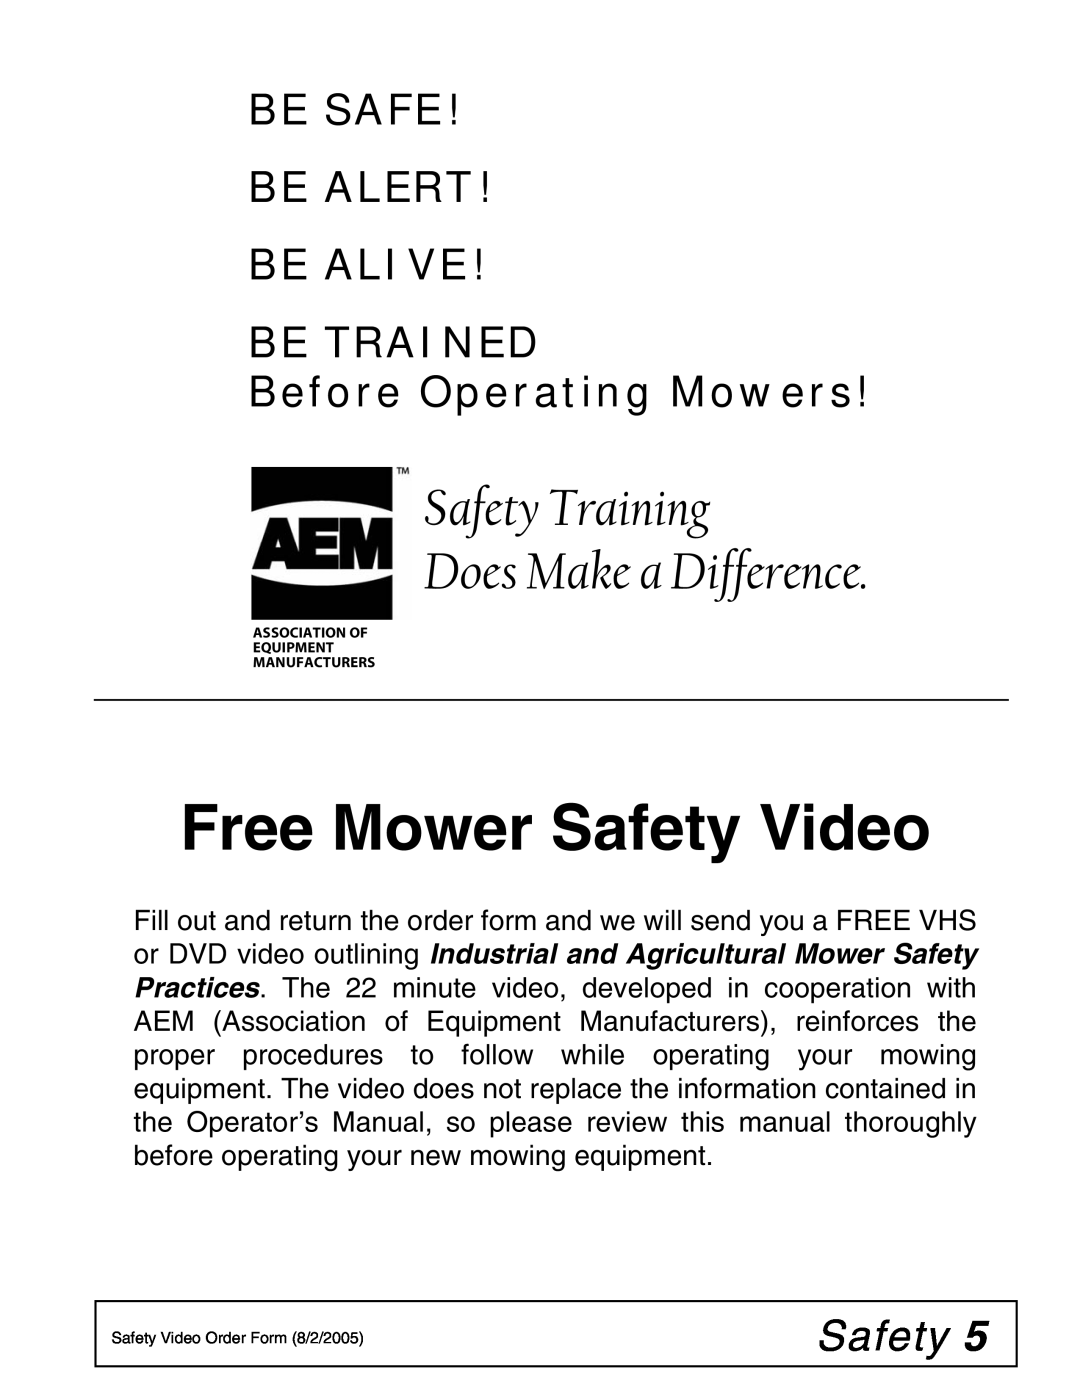 Woods Equipment DS1260Q, DSO1260Q, DS1440Q manual Free Mower Safety Video, Safety Training Does Make a Difference 